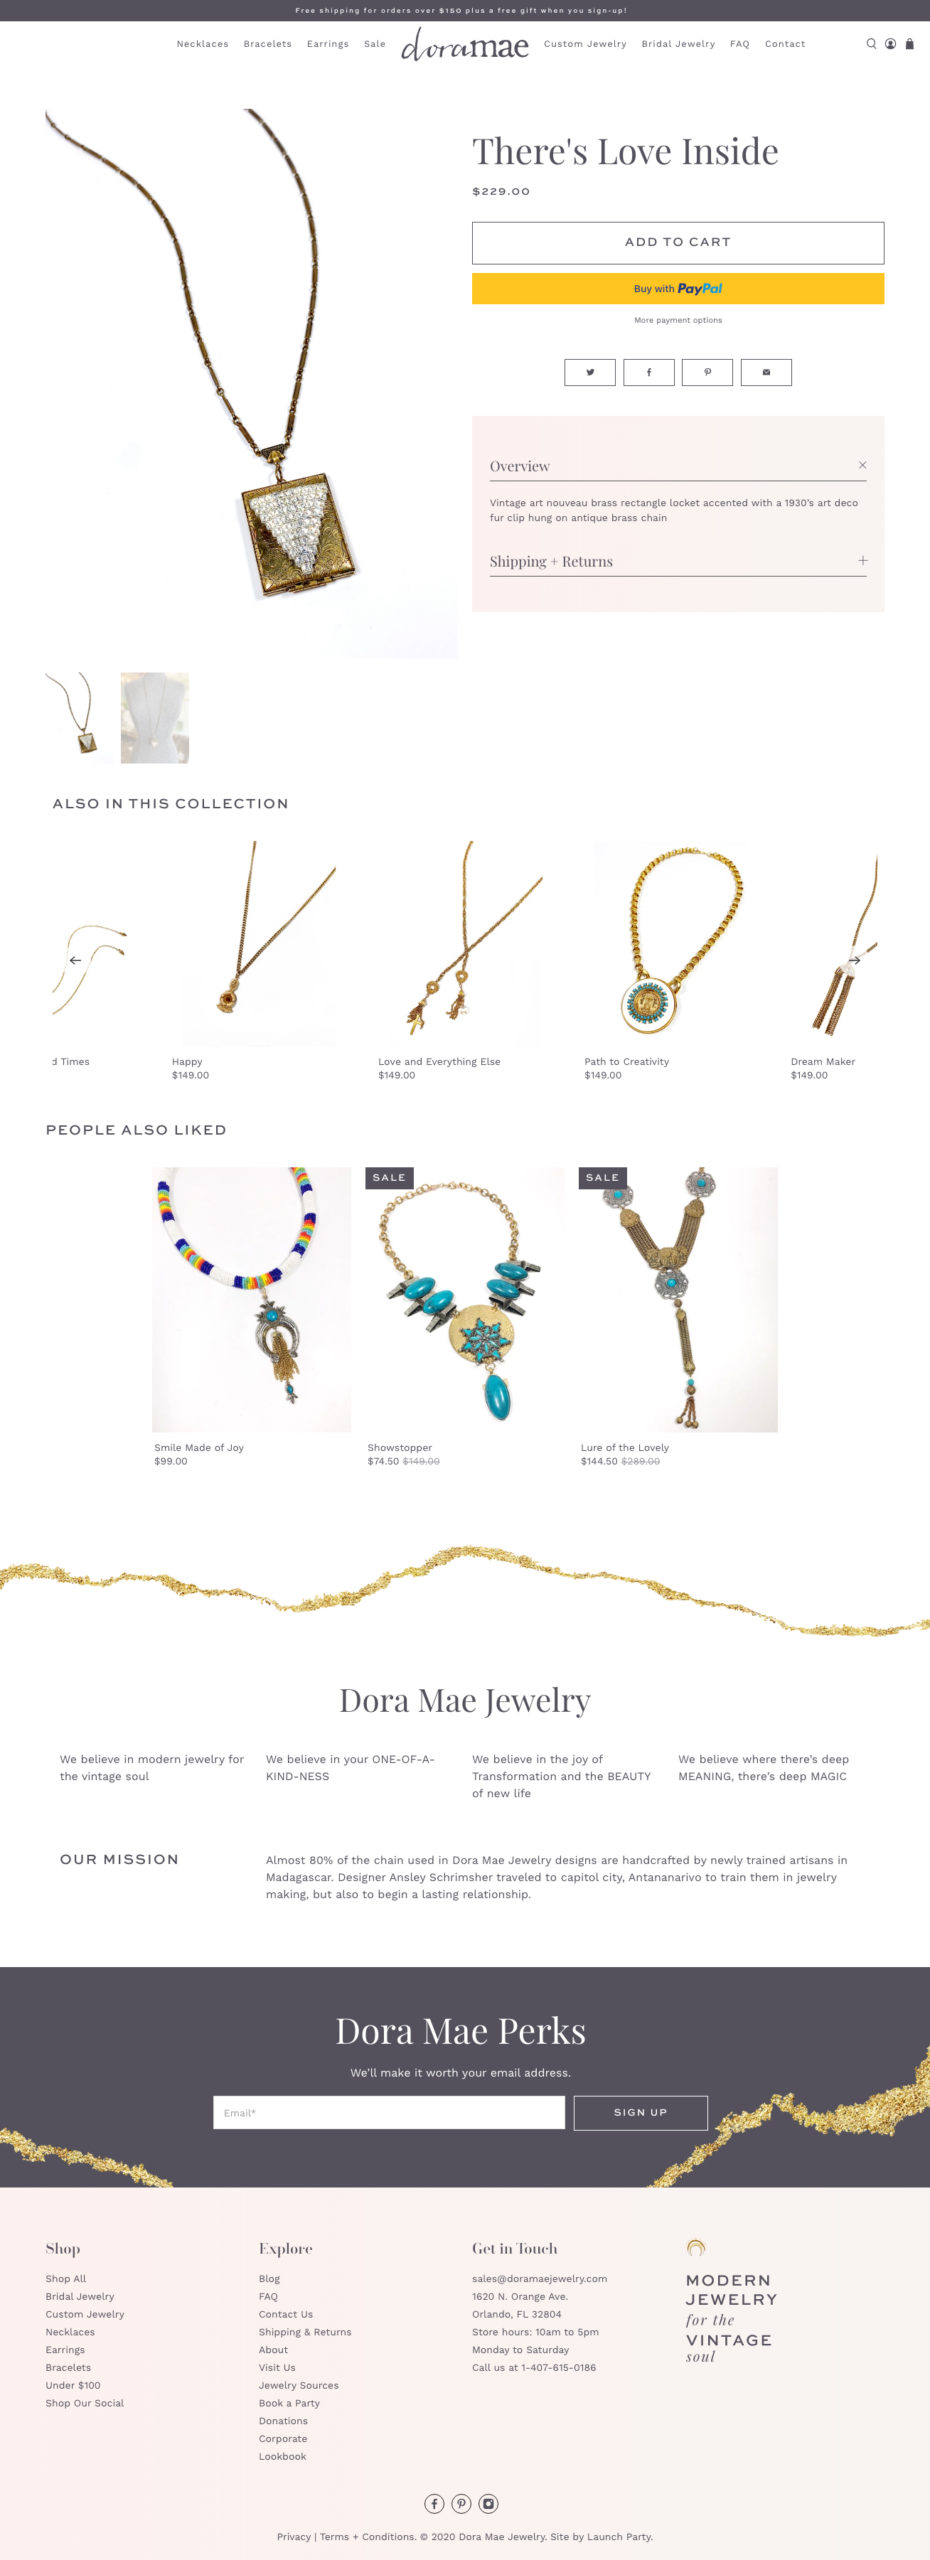 dora mae jewelry new shopify website product page example screenshot